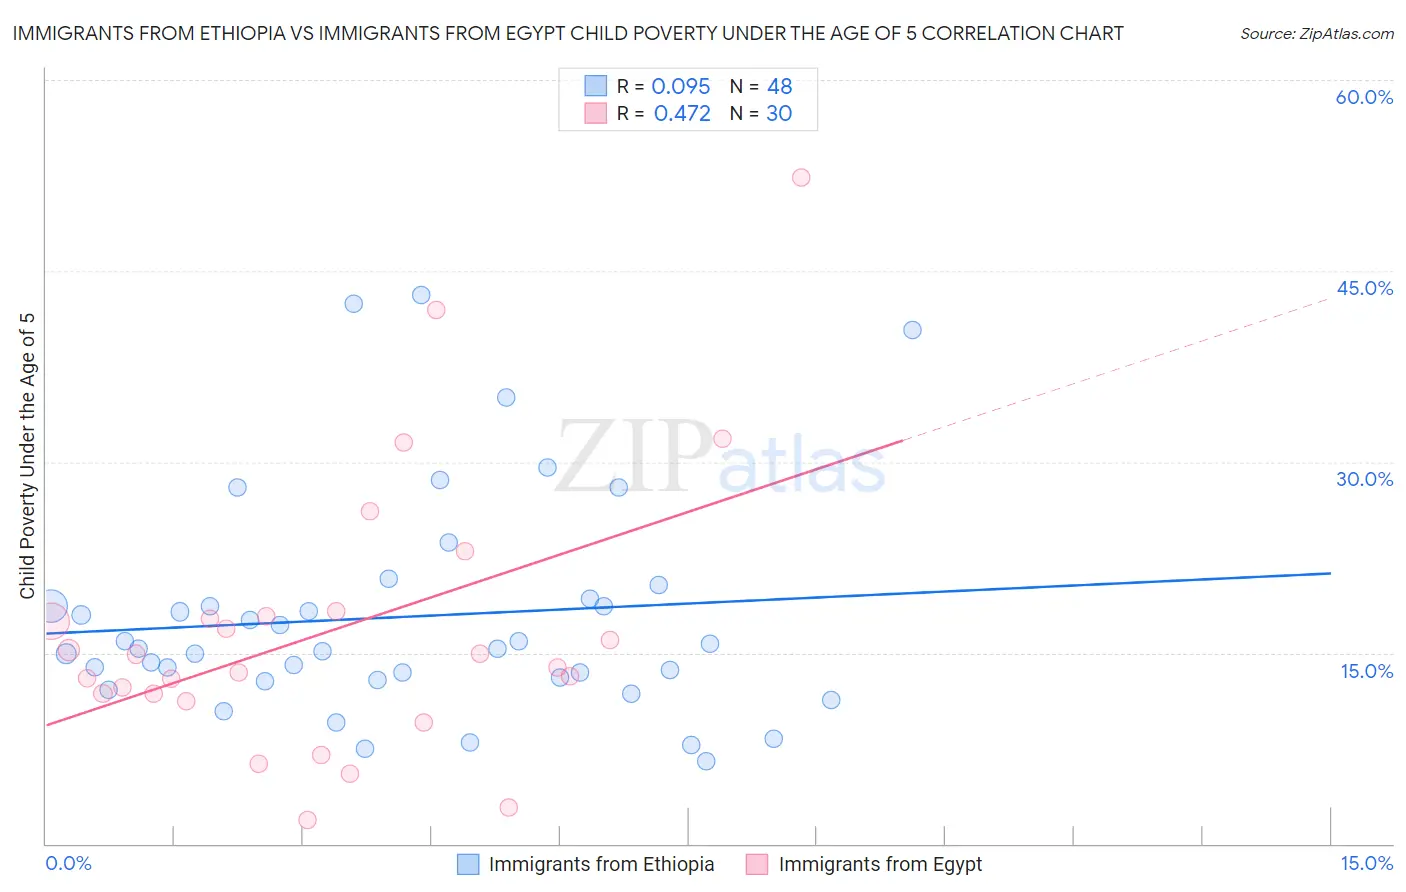 Immigrants from Ethiopia vs Immigrants from Egypt Child Poverty Under the Age of 5